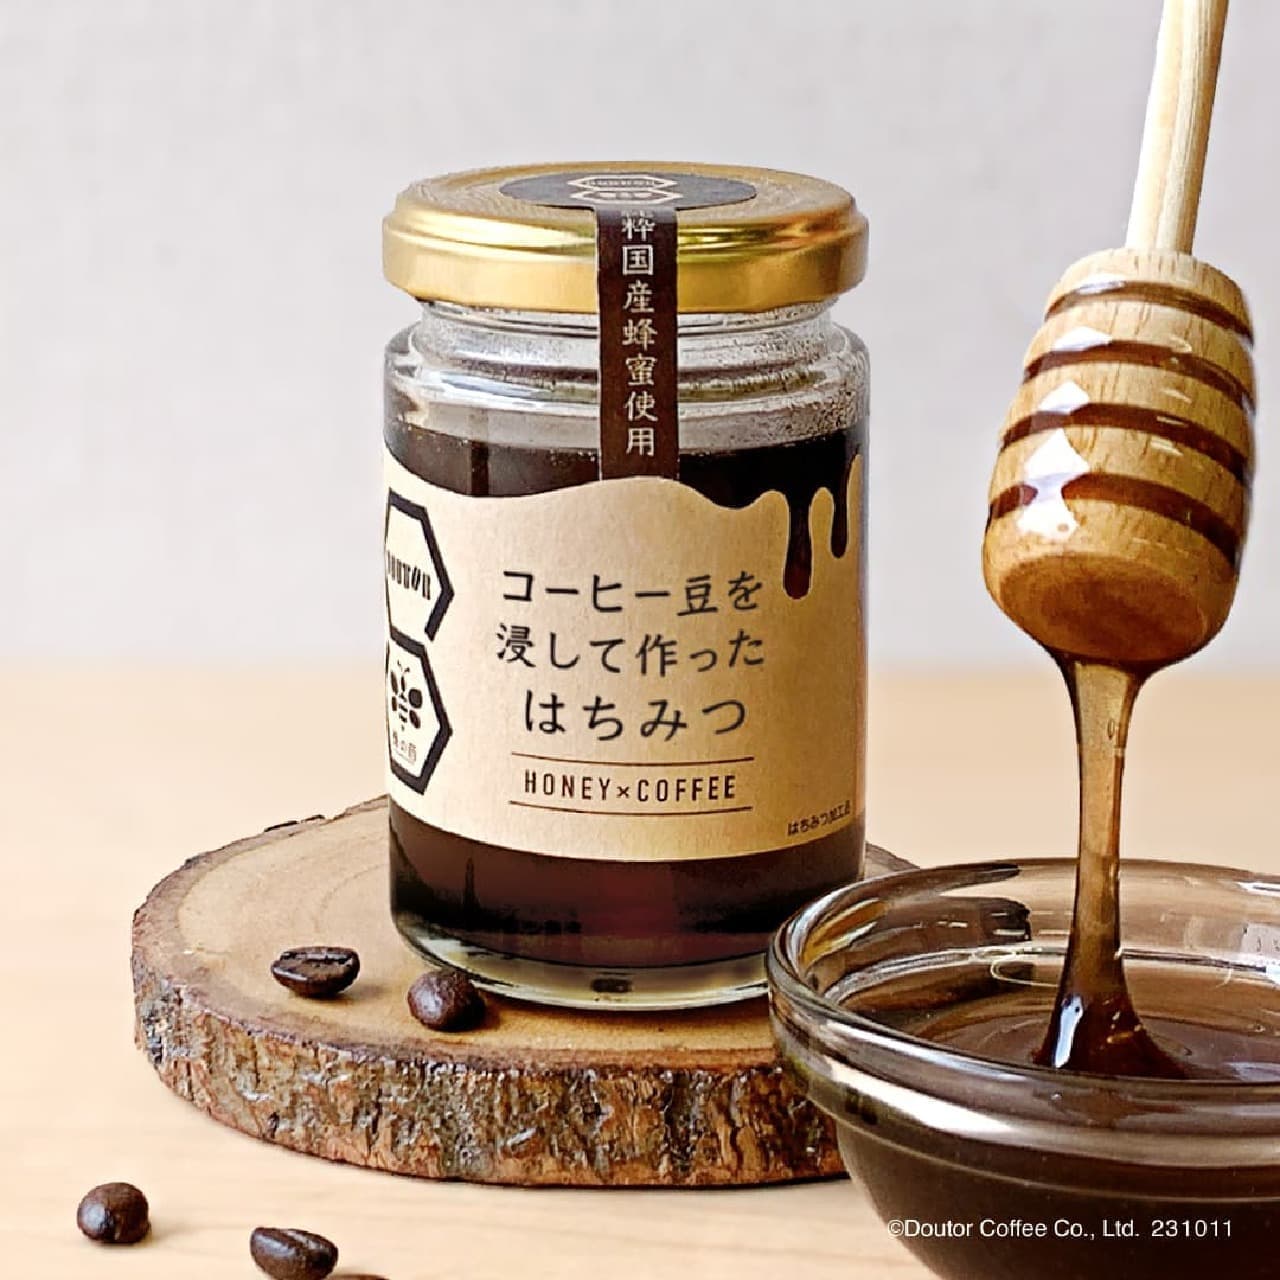 Doutor Online Shop "Honey made by soaking coffee beans